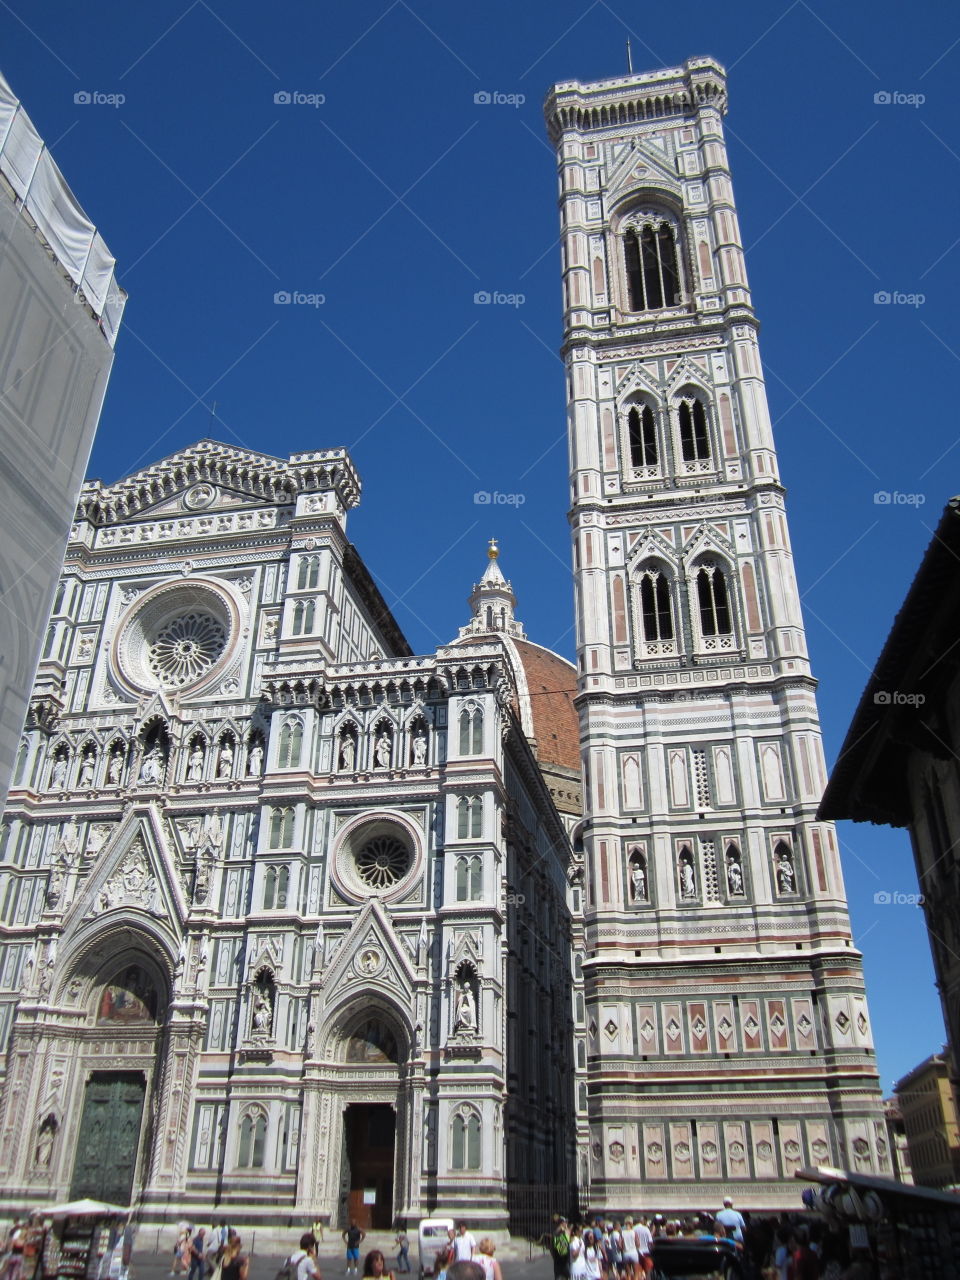 Architecture, Church, Cathedral, Old, Tower